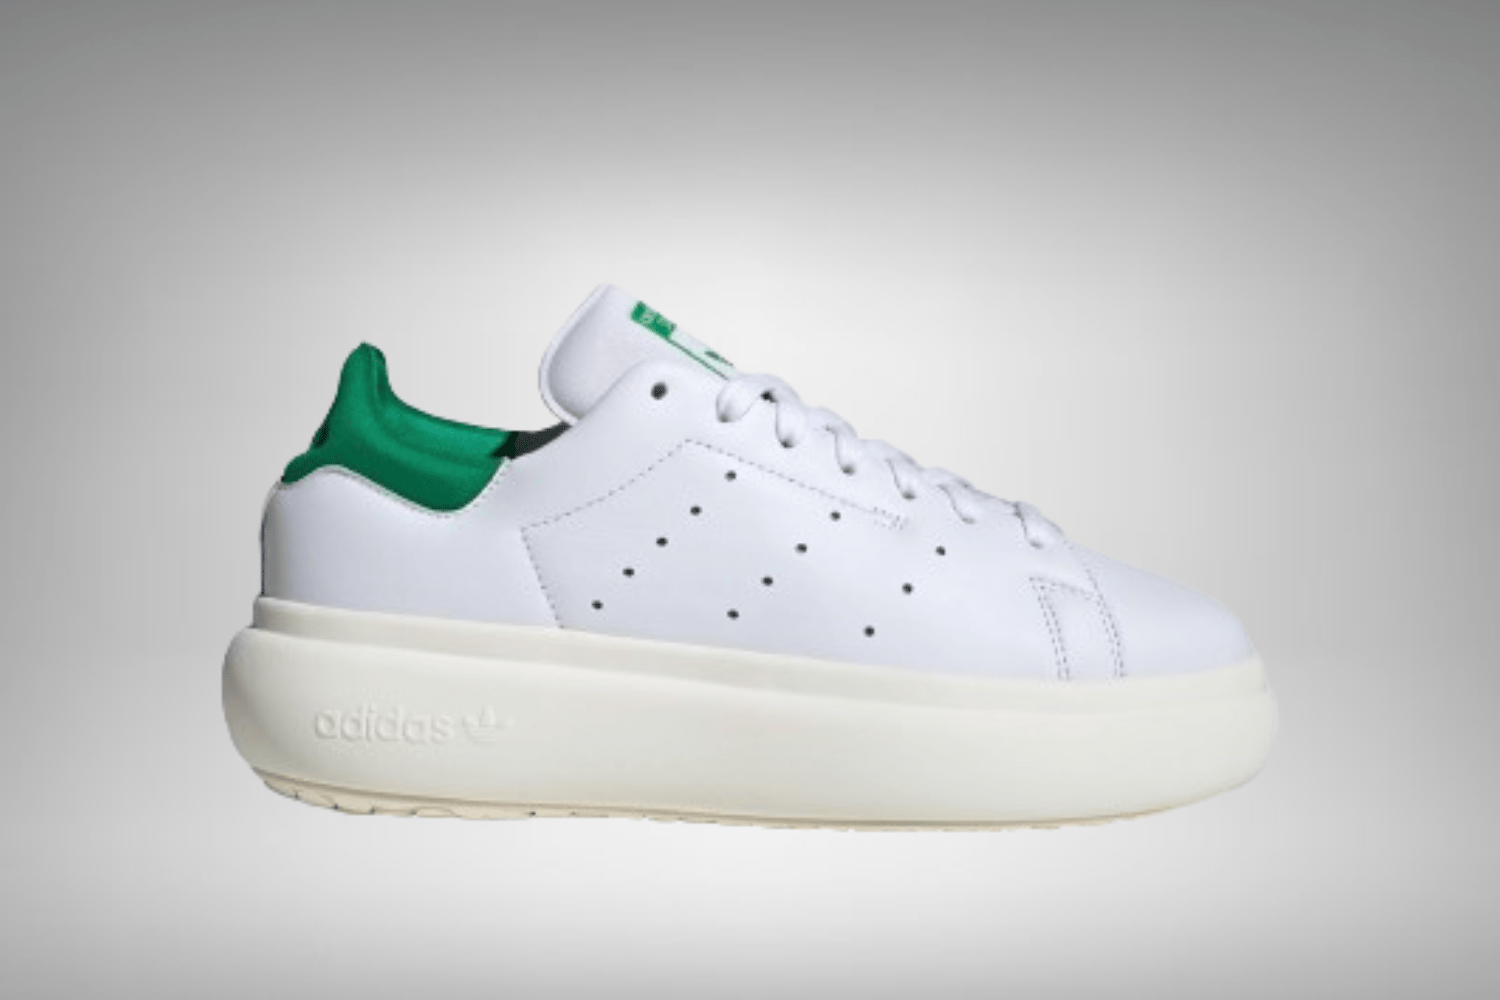 The adidas Stan Smith receives a platform variant